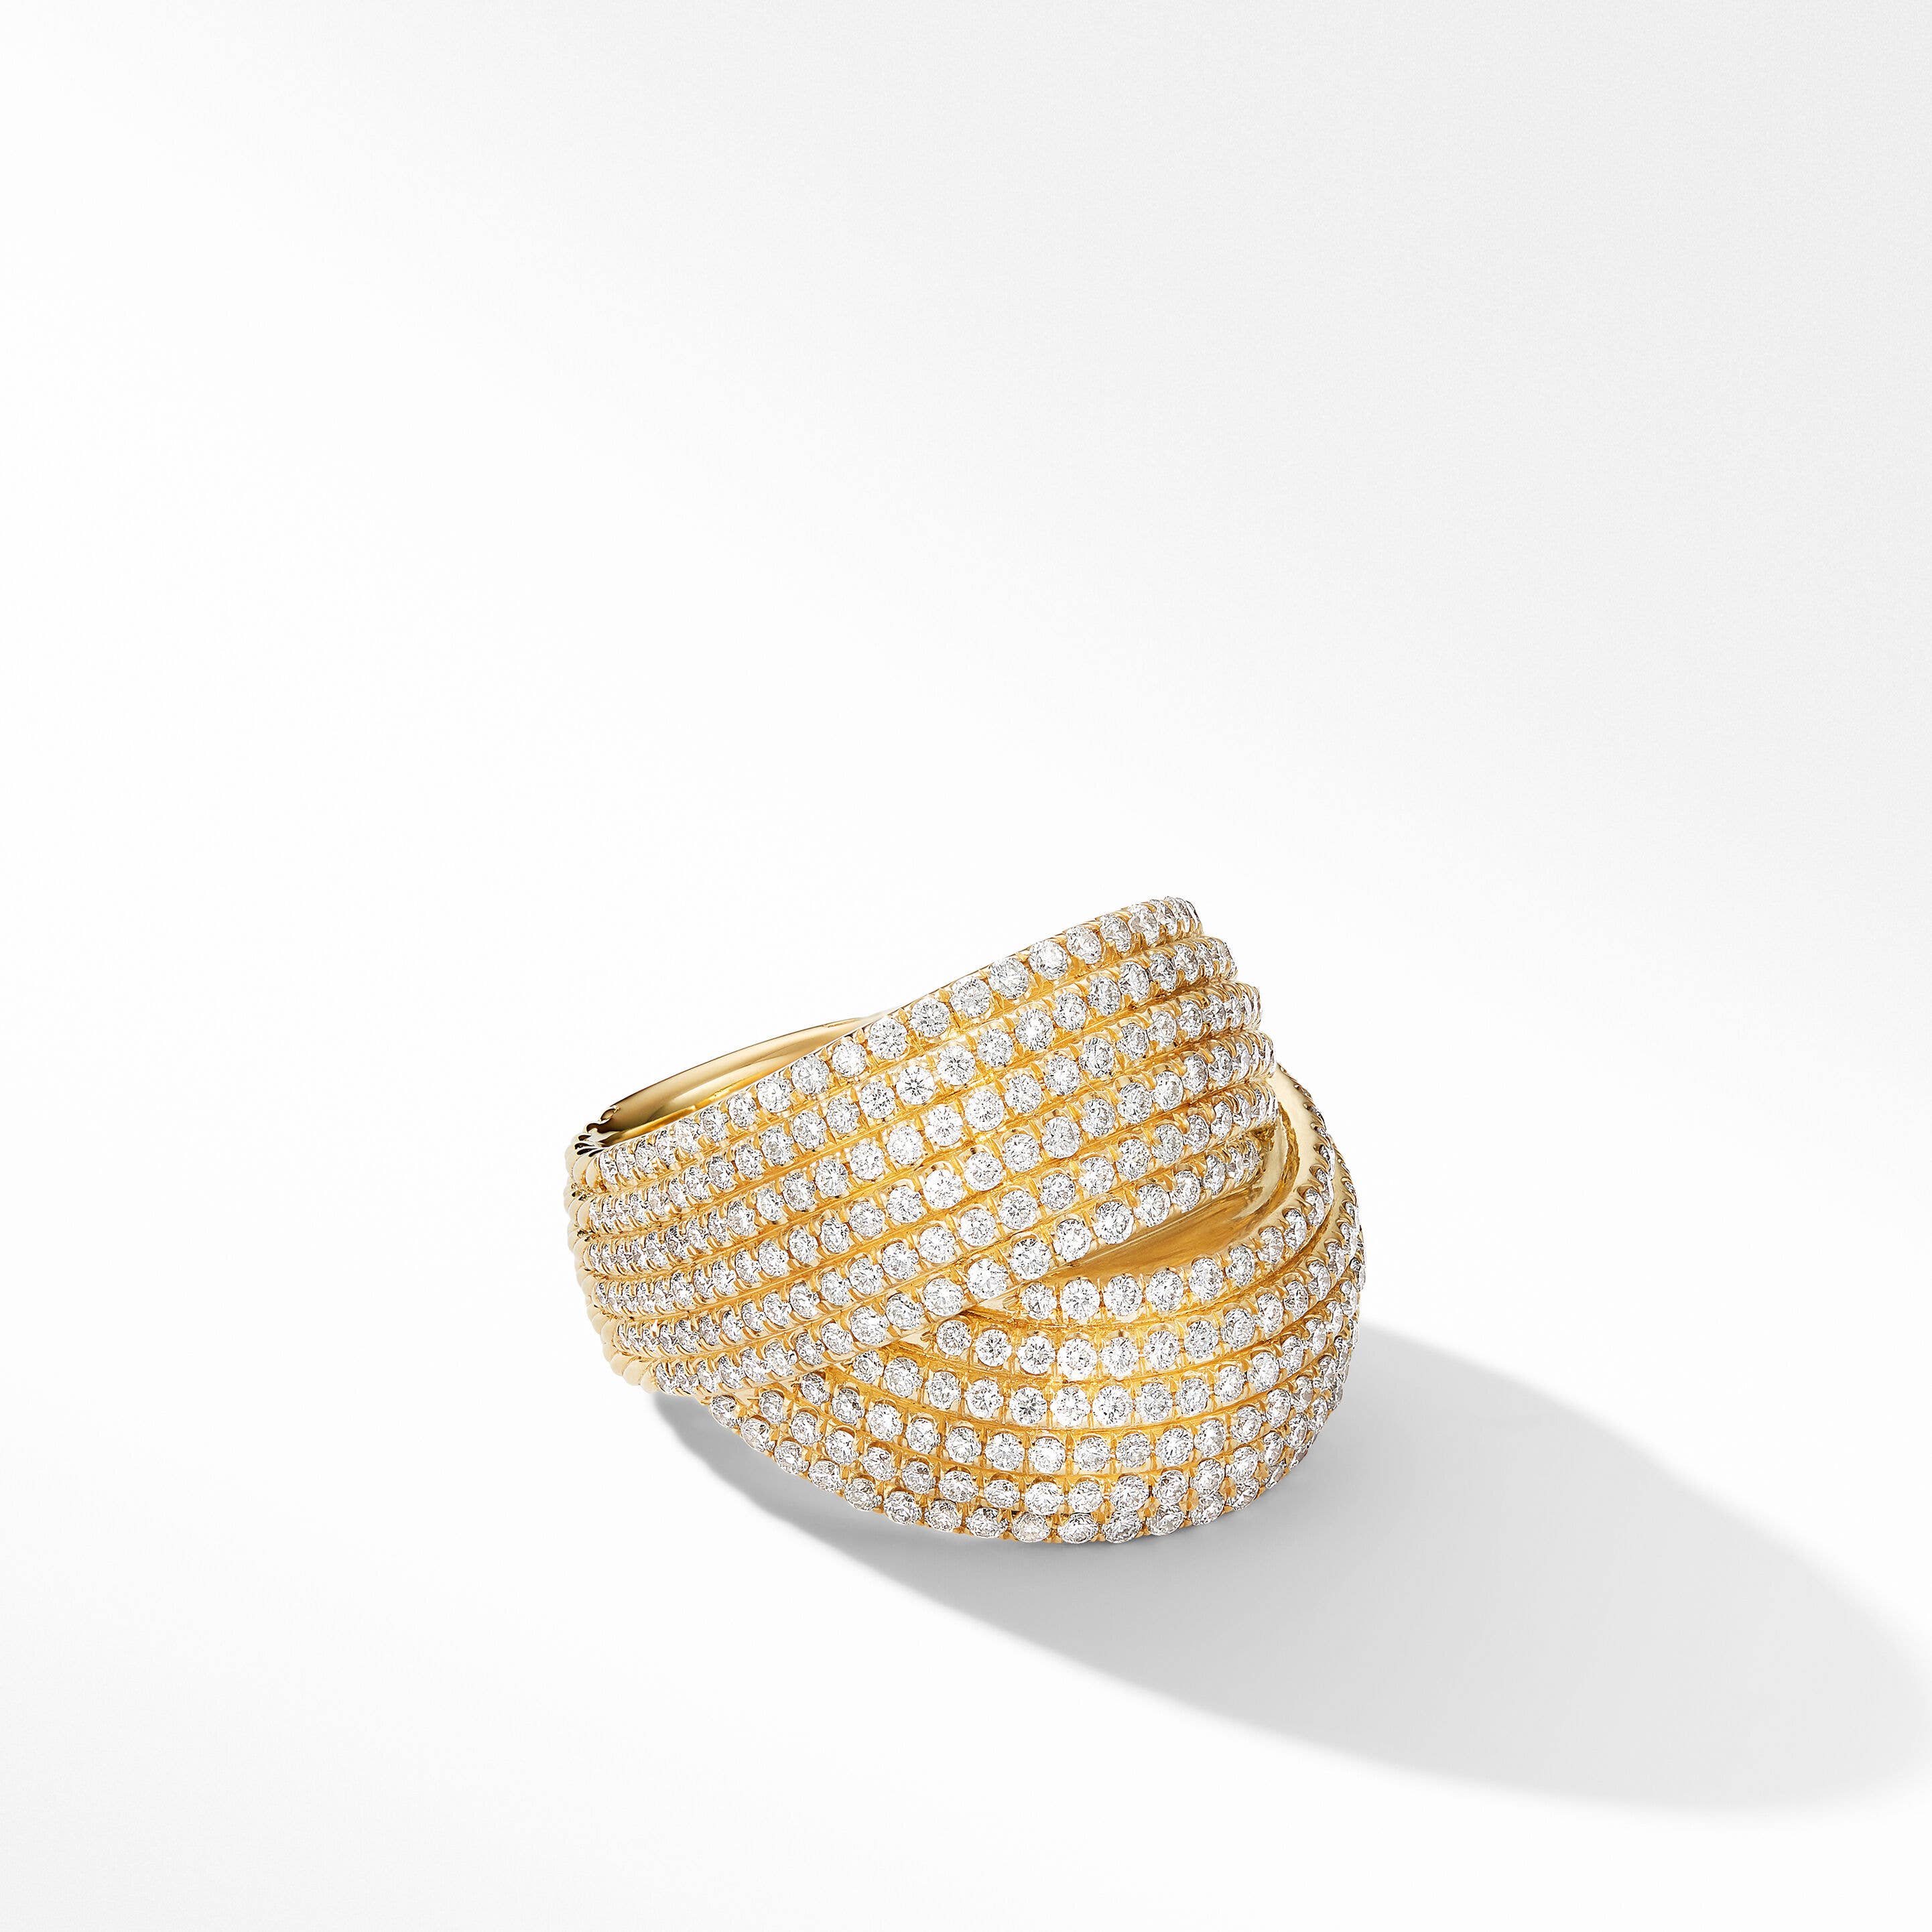 DY Origami Ring in 18K Yellow Gold with Full Pavé Diamonds